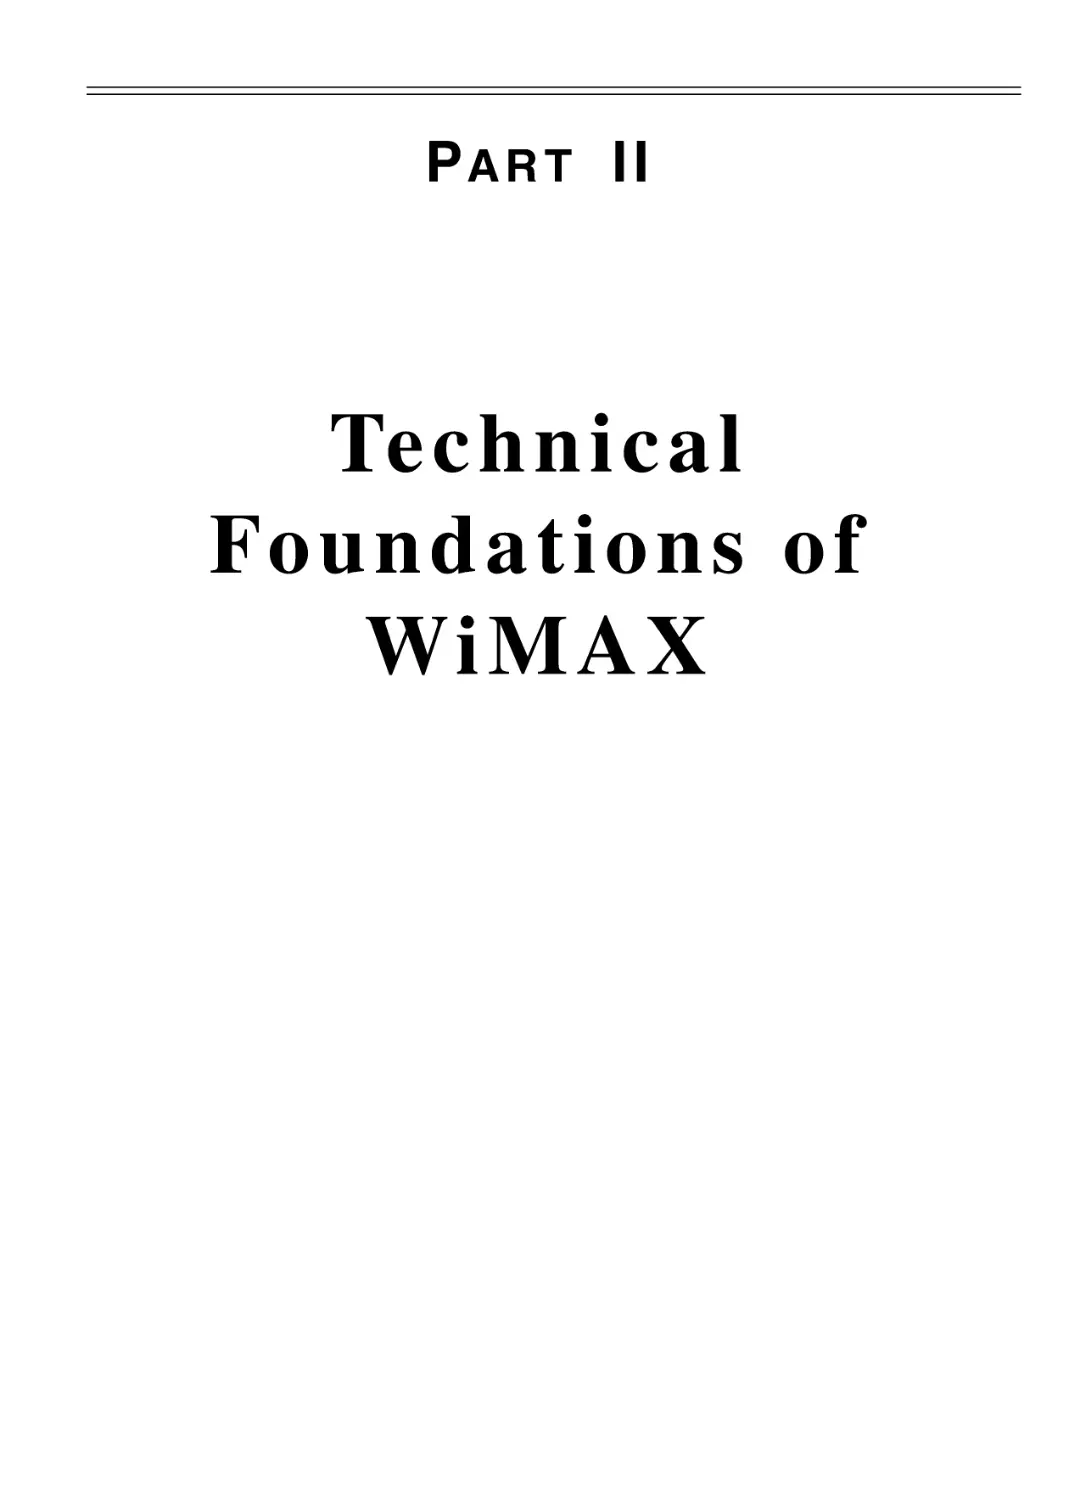 Technical Foundations of WiMAX